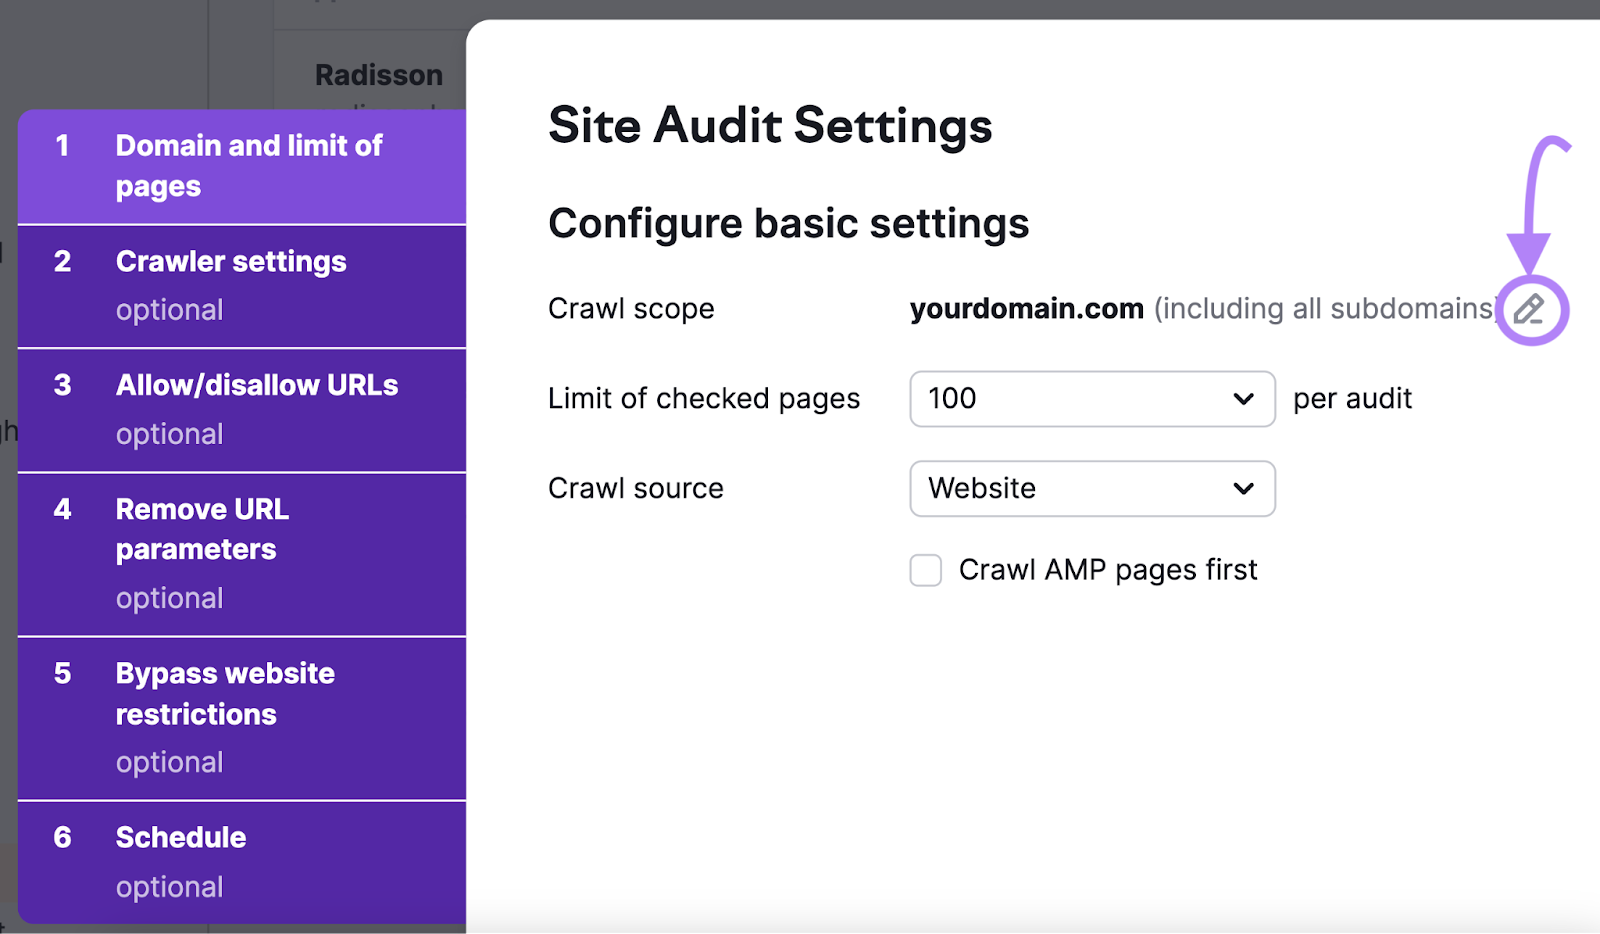 Define the scope of your crawl in Site Audit settings